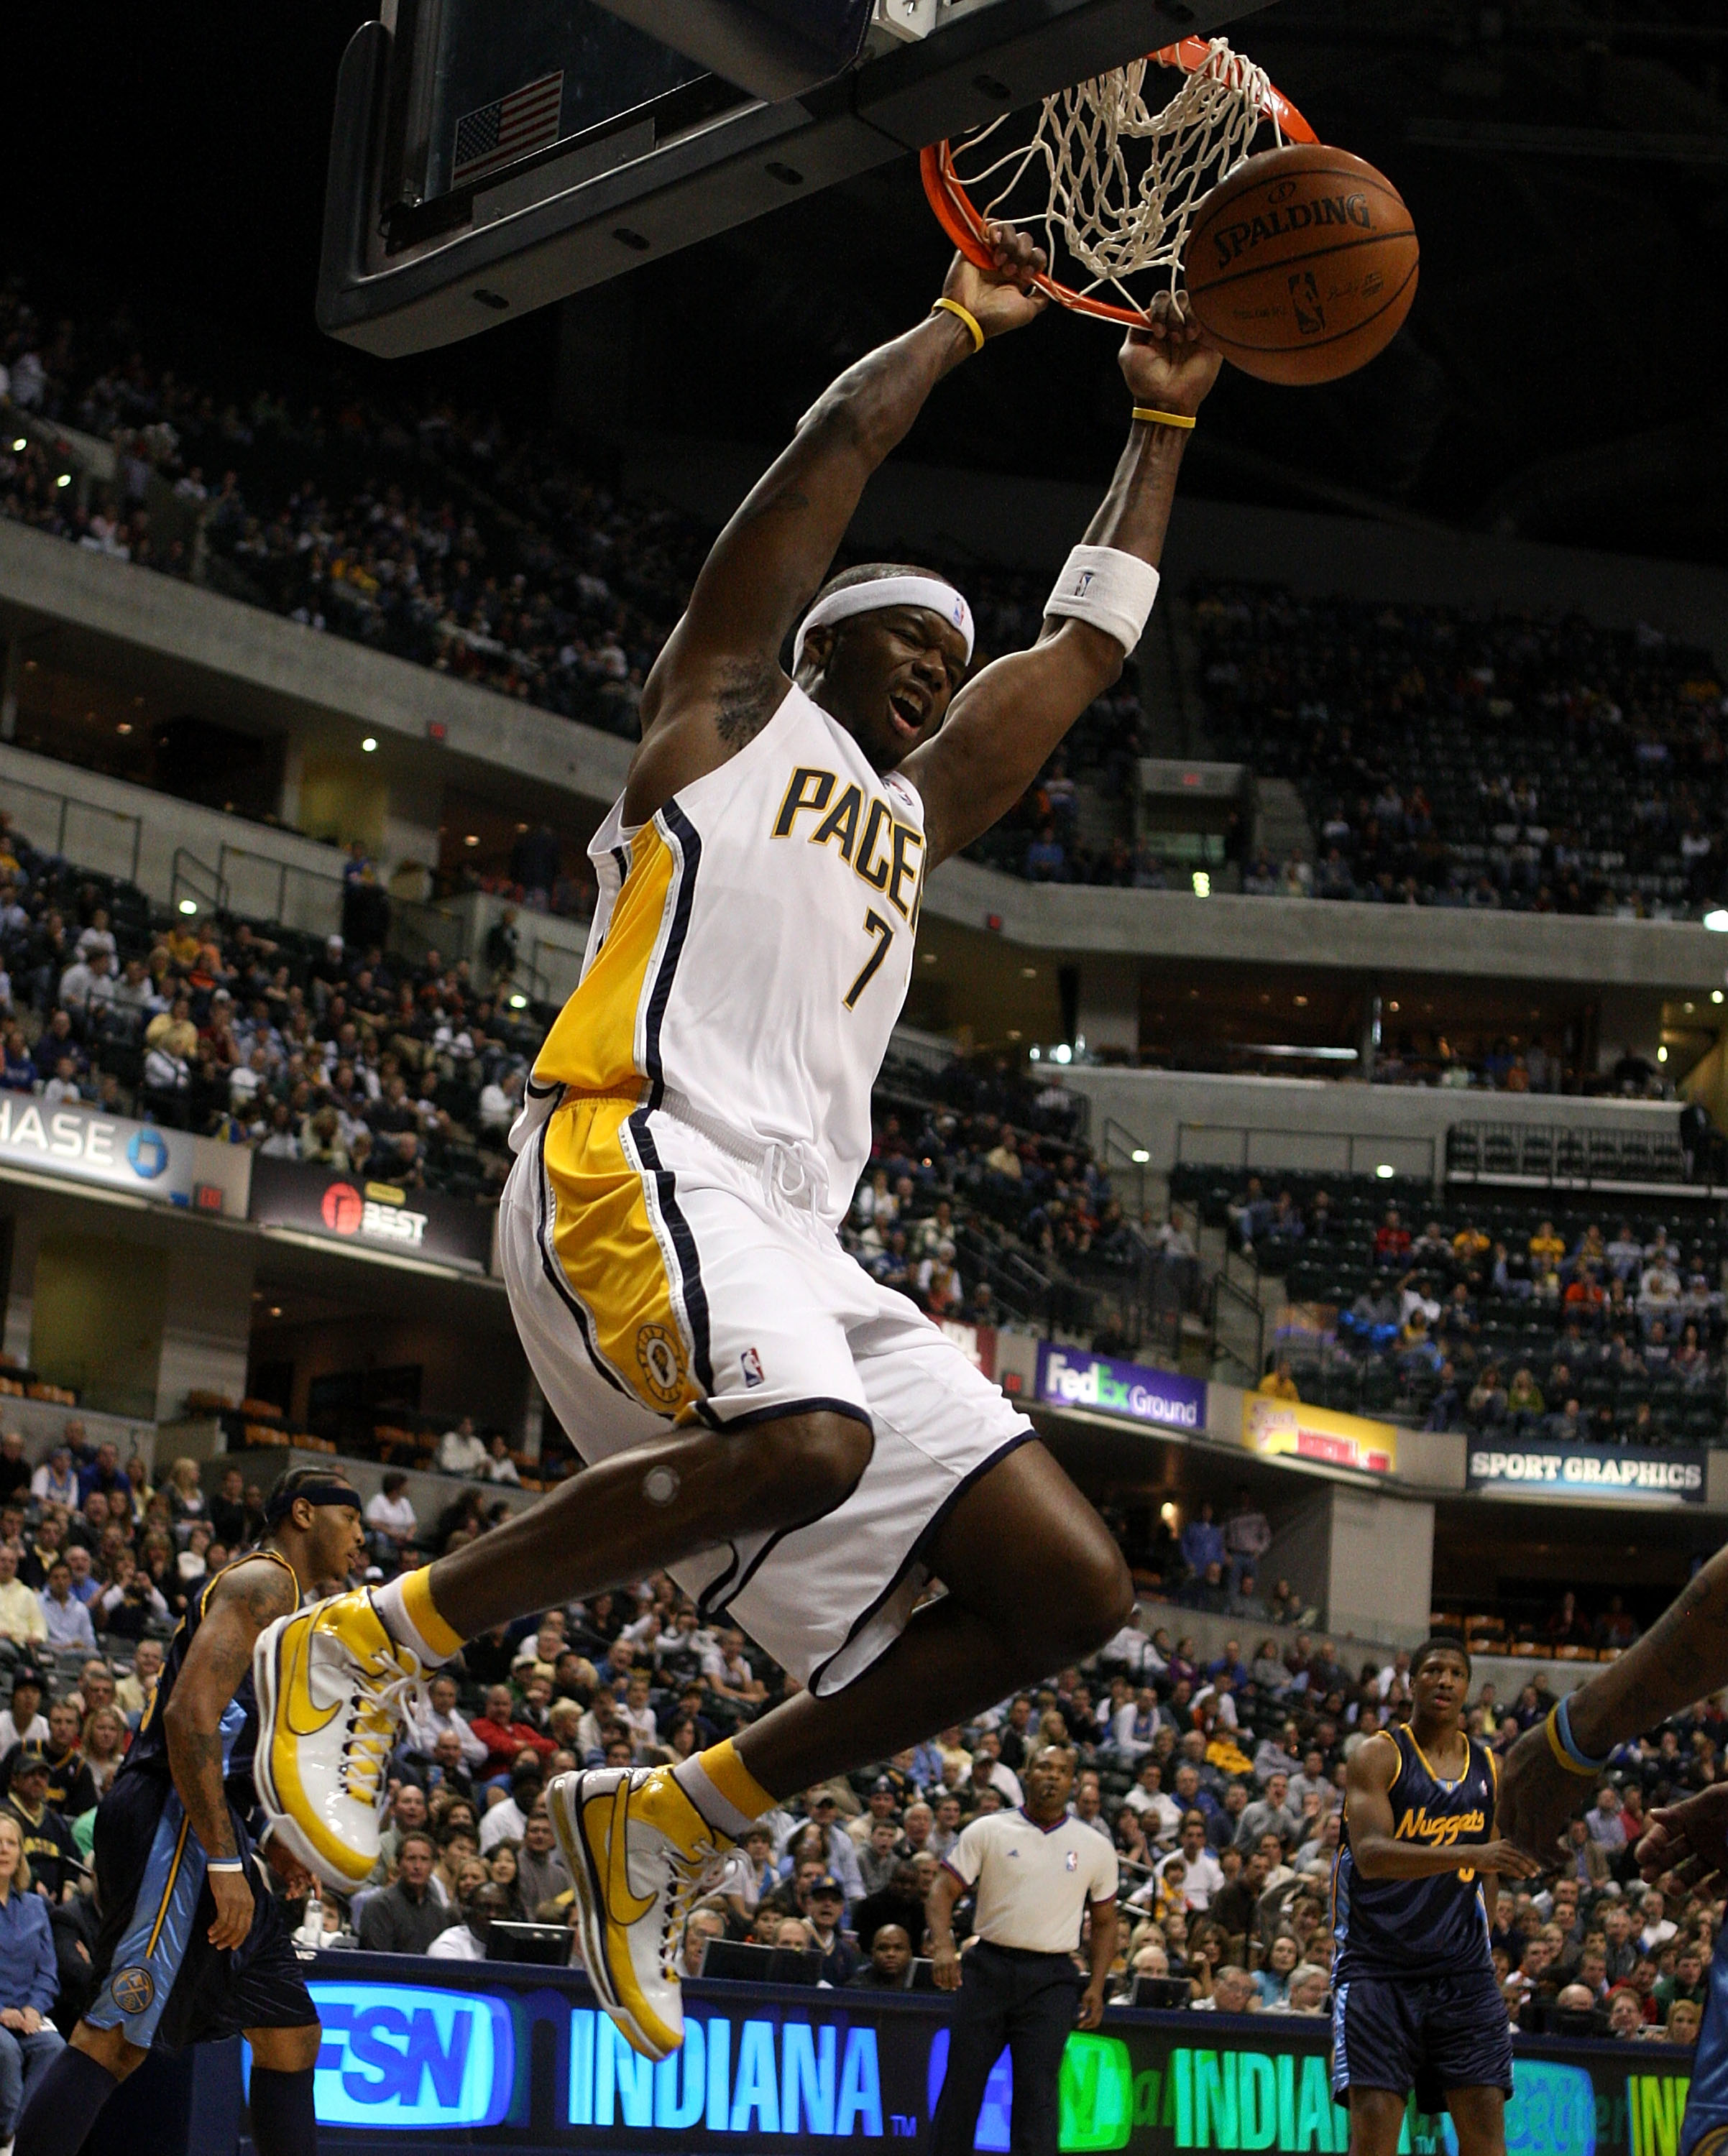 INDIANAPOLIS - NOVEMBER 10:   Jermaine O'Neal #7 dunks the ball during the NBA game against the Denver Nuggets at Conseco Fieldhouse November 10, 2007 in Indianapolis, Indiana. The Nuggets won 113-106. NOTE TO USER: User expressly acknowledges and agrees